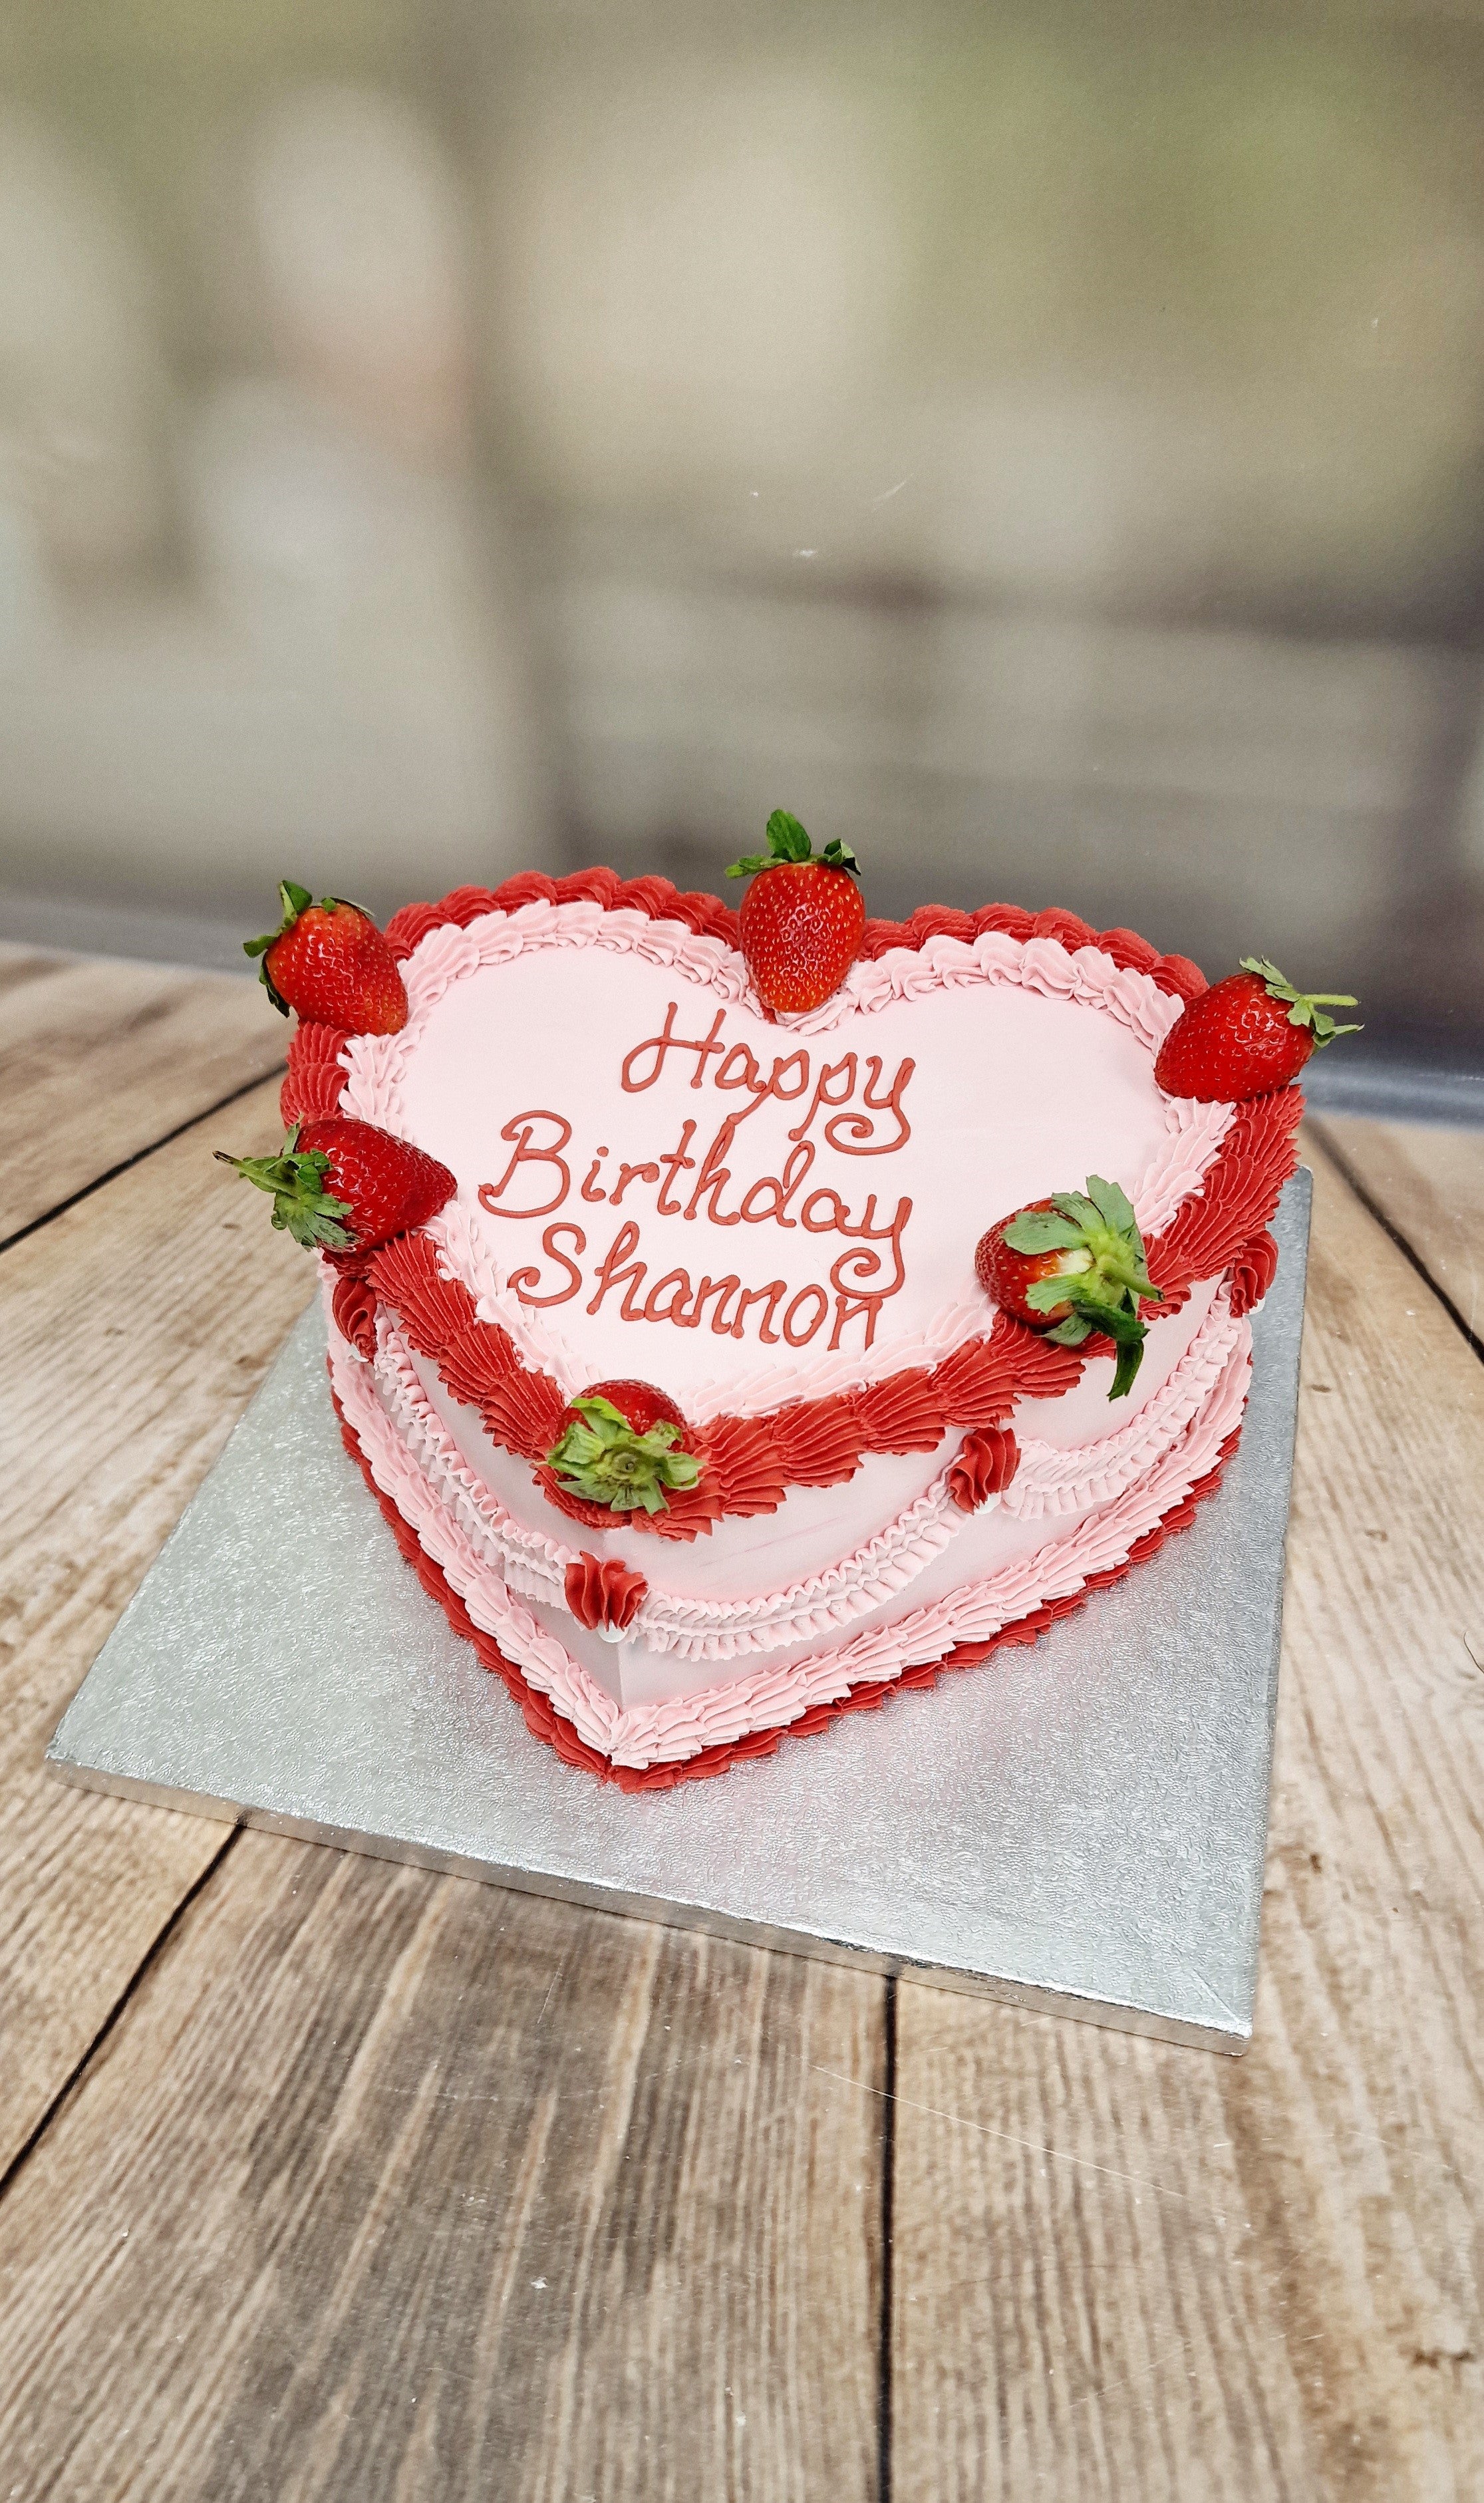 Vintage Heart Cake with Strawberries